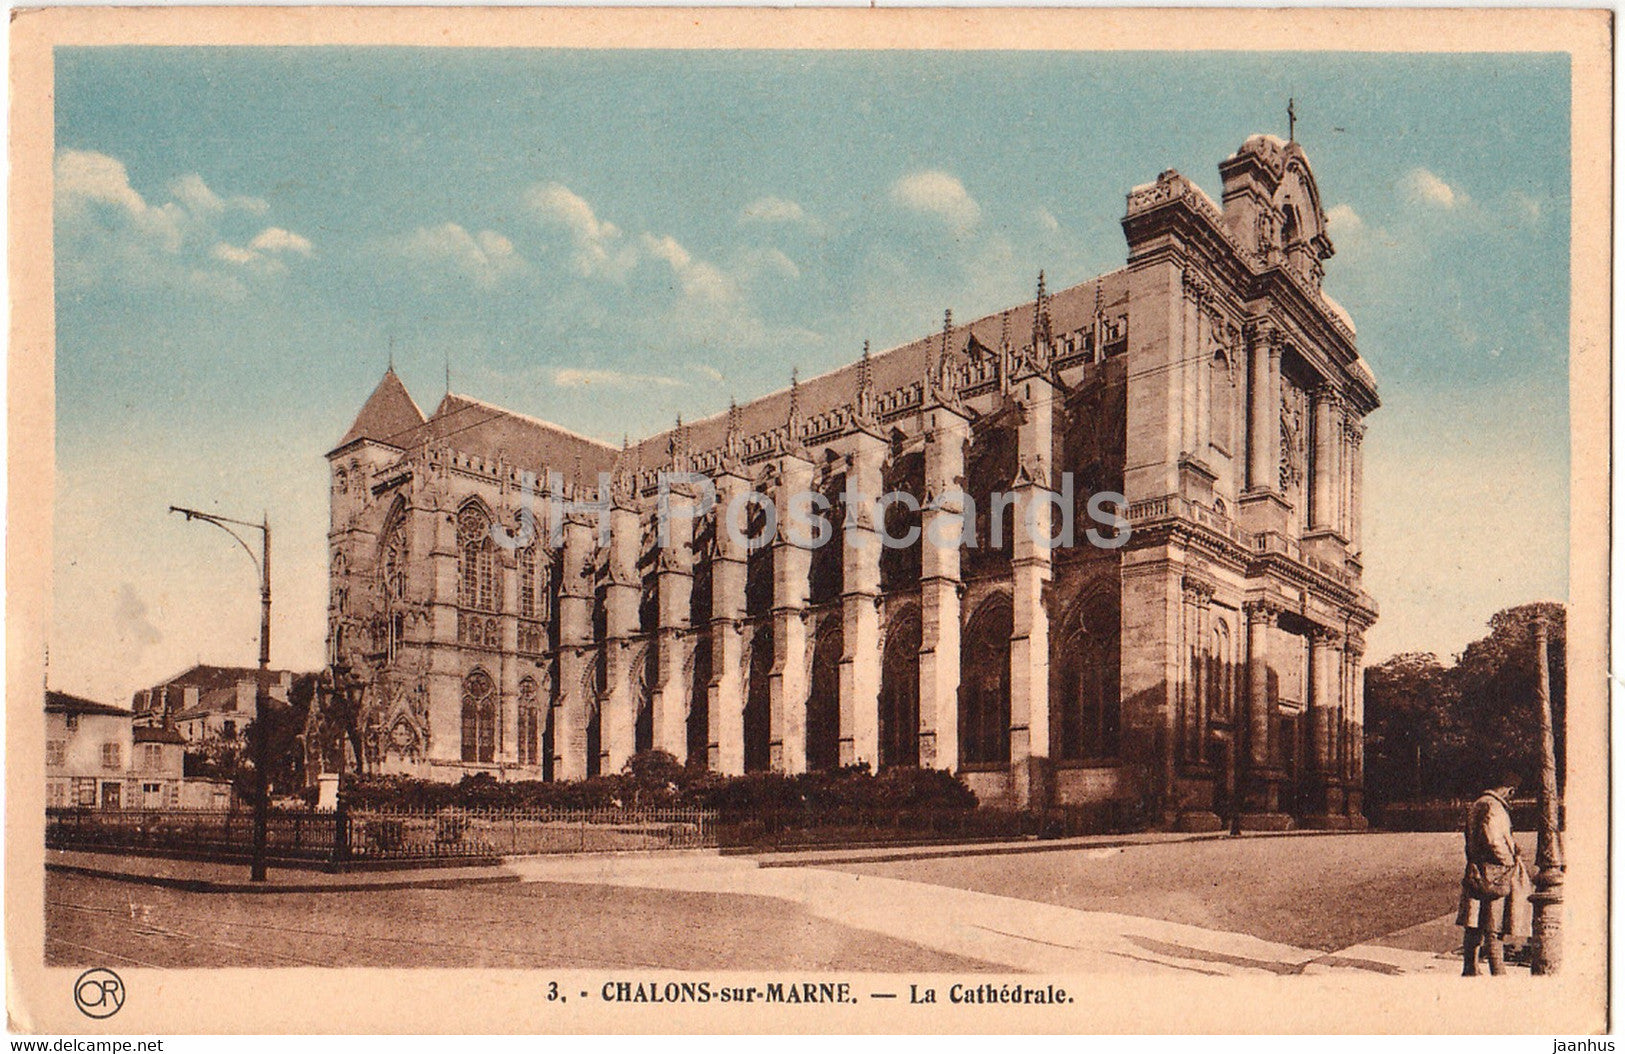 Chalons sur Marne - La Cathedrale - cathedral - 3 - old postcard - France - unused - JH Postcards